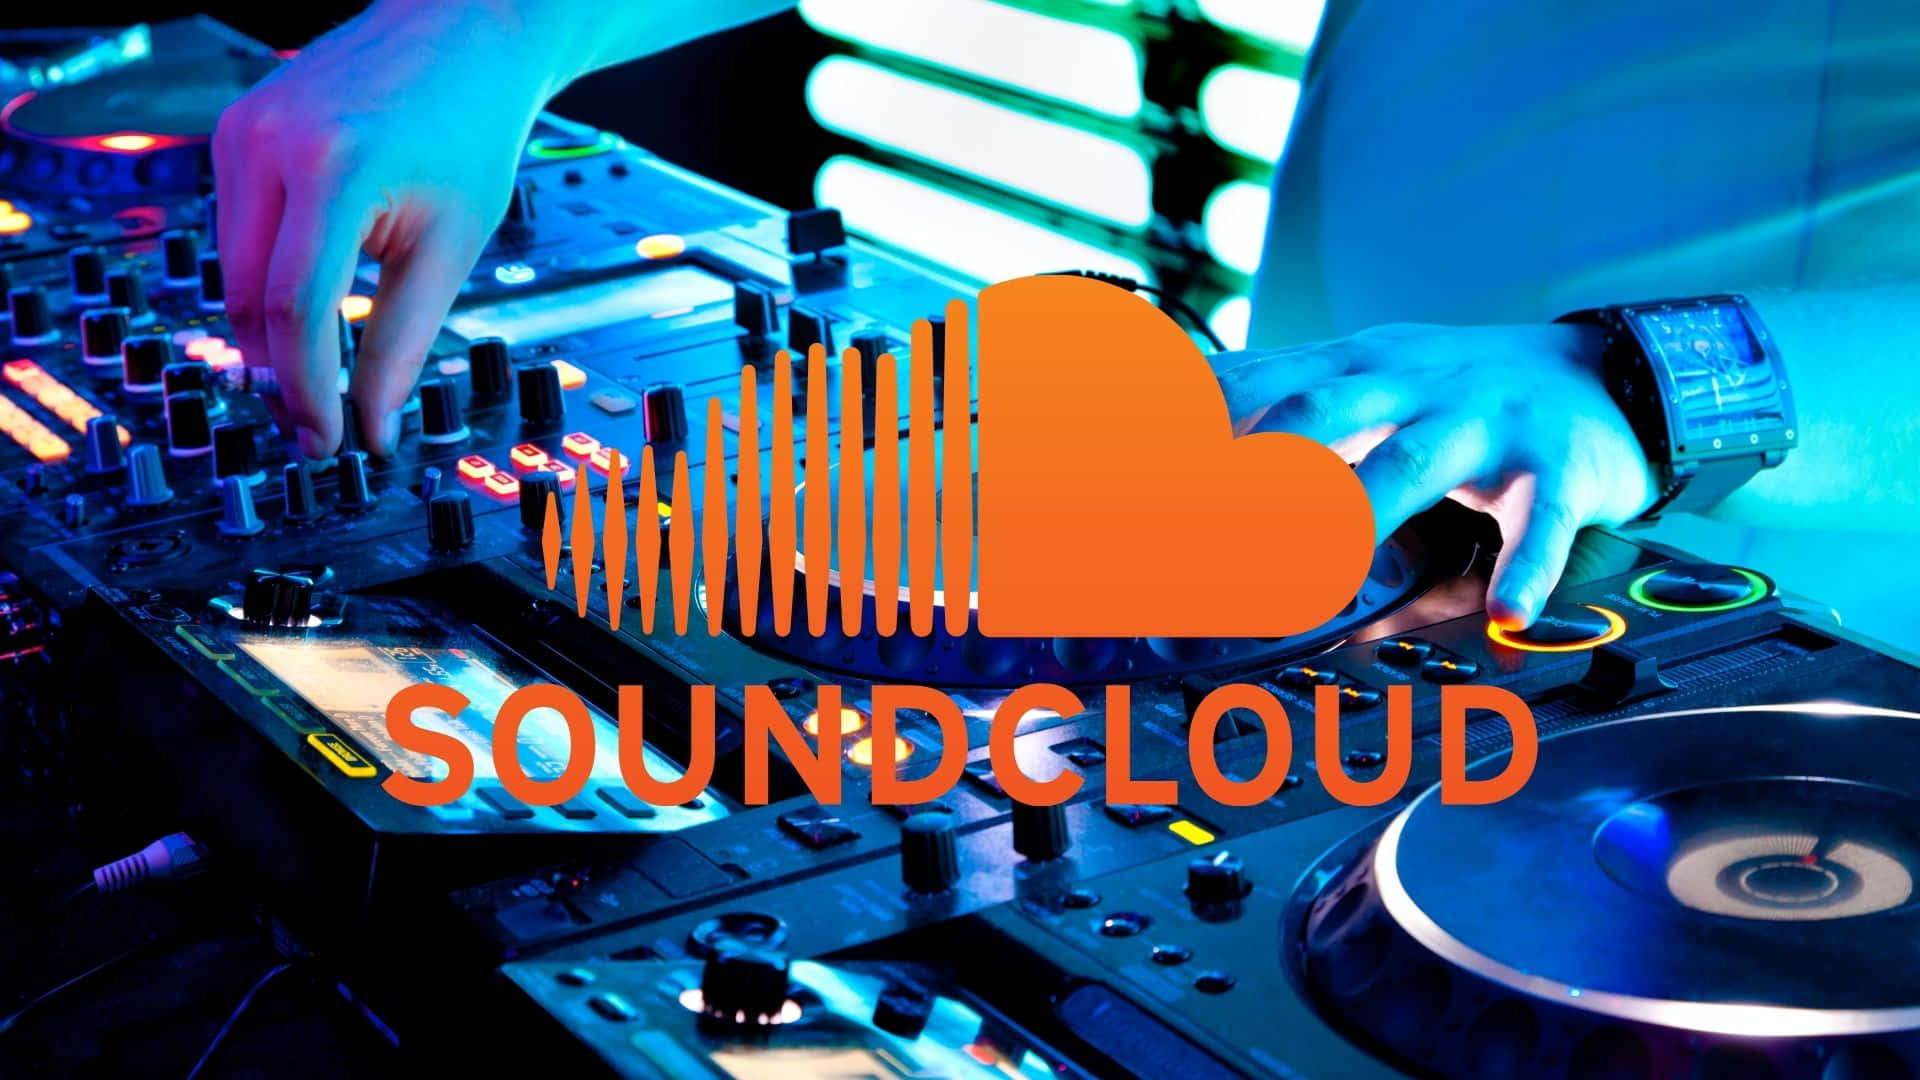 Listen to the Latest Music with Soundcloud